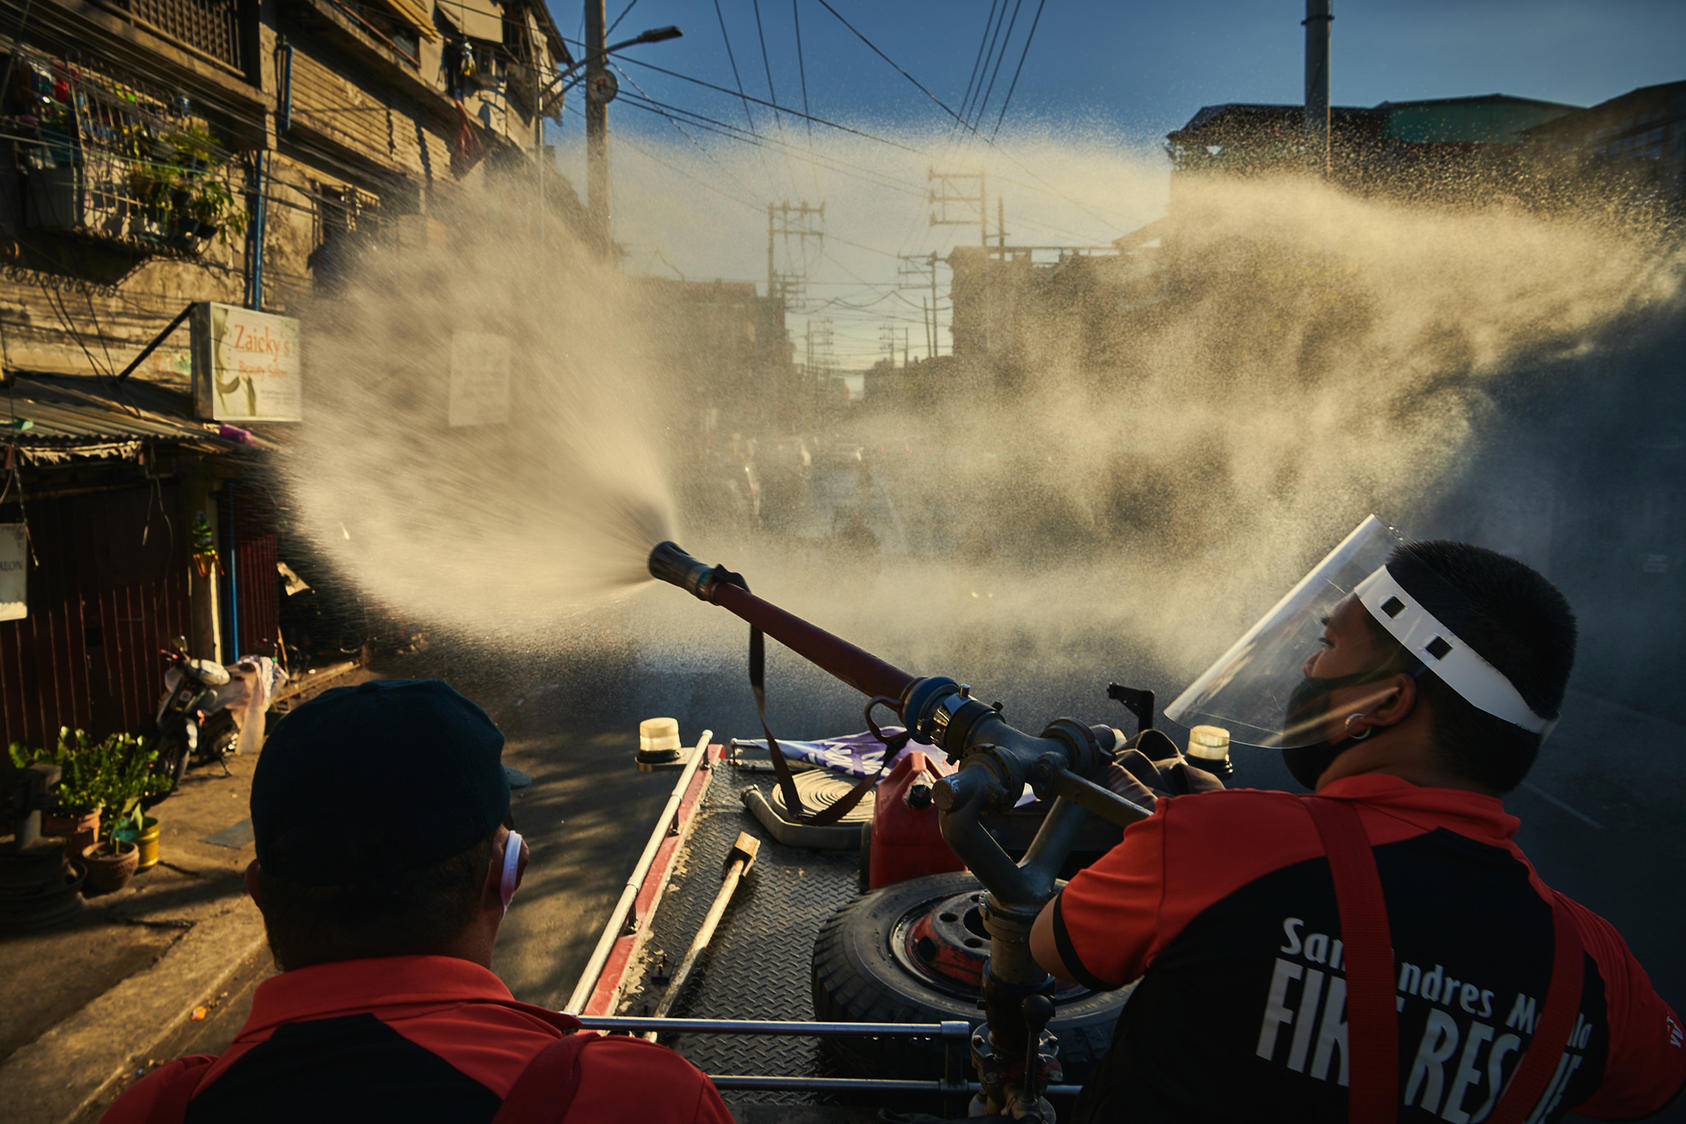 Firefighters spray disinfectant along a road in Manila, Philippines, on April 6, 2020, in an effort to keep the coronavirus from spreading. (Photo by Jes Aznar/New York Times)